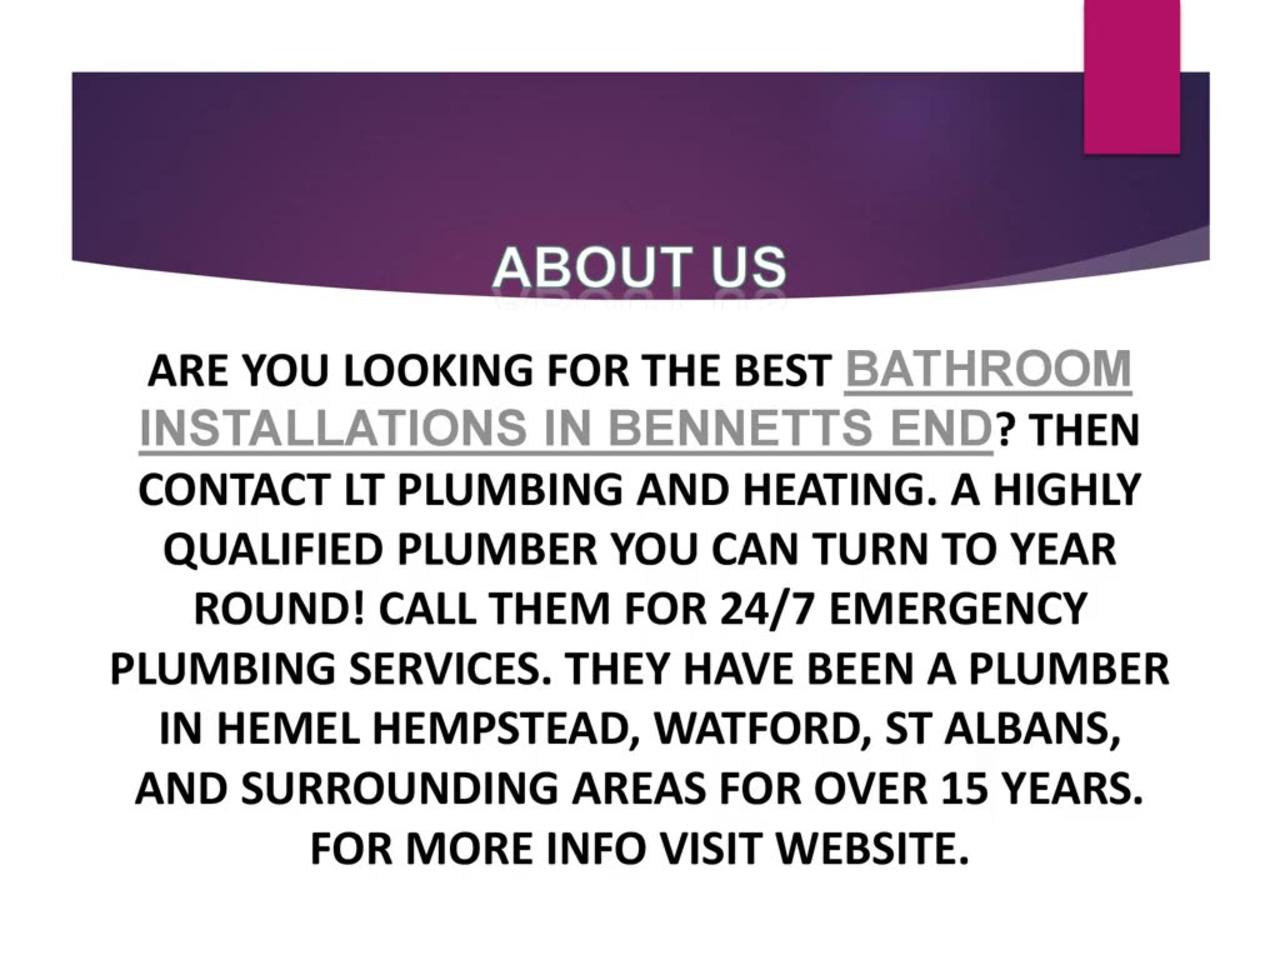 Best Bathroom Installations in Bennetts End